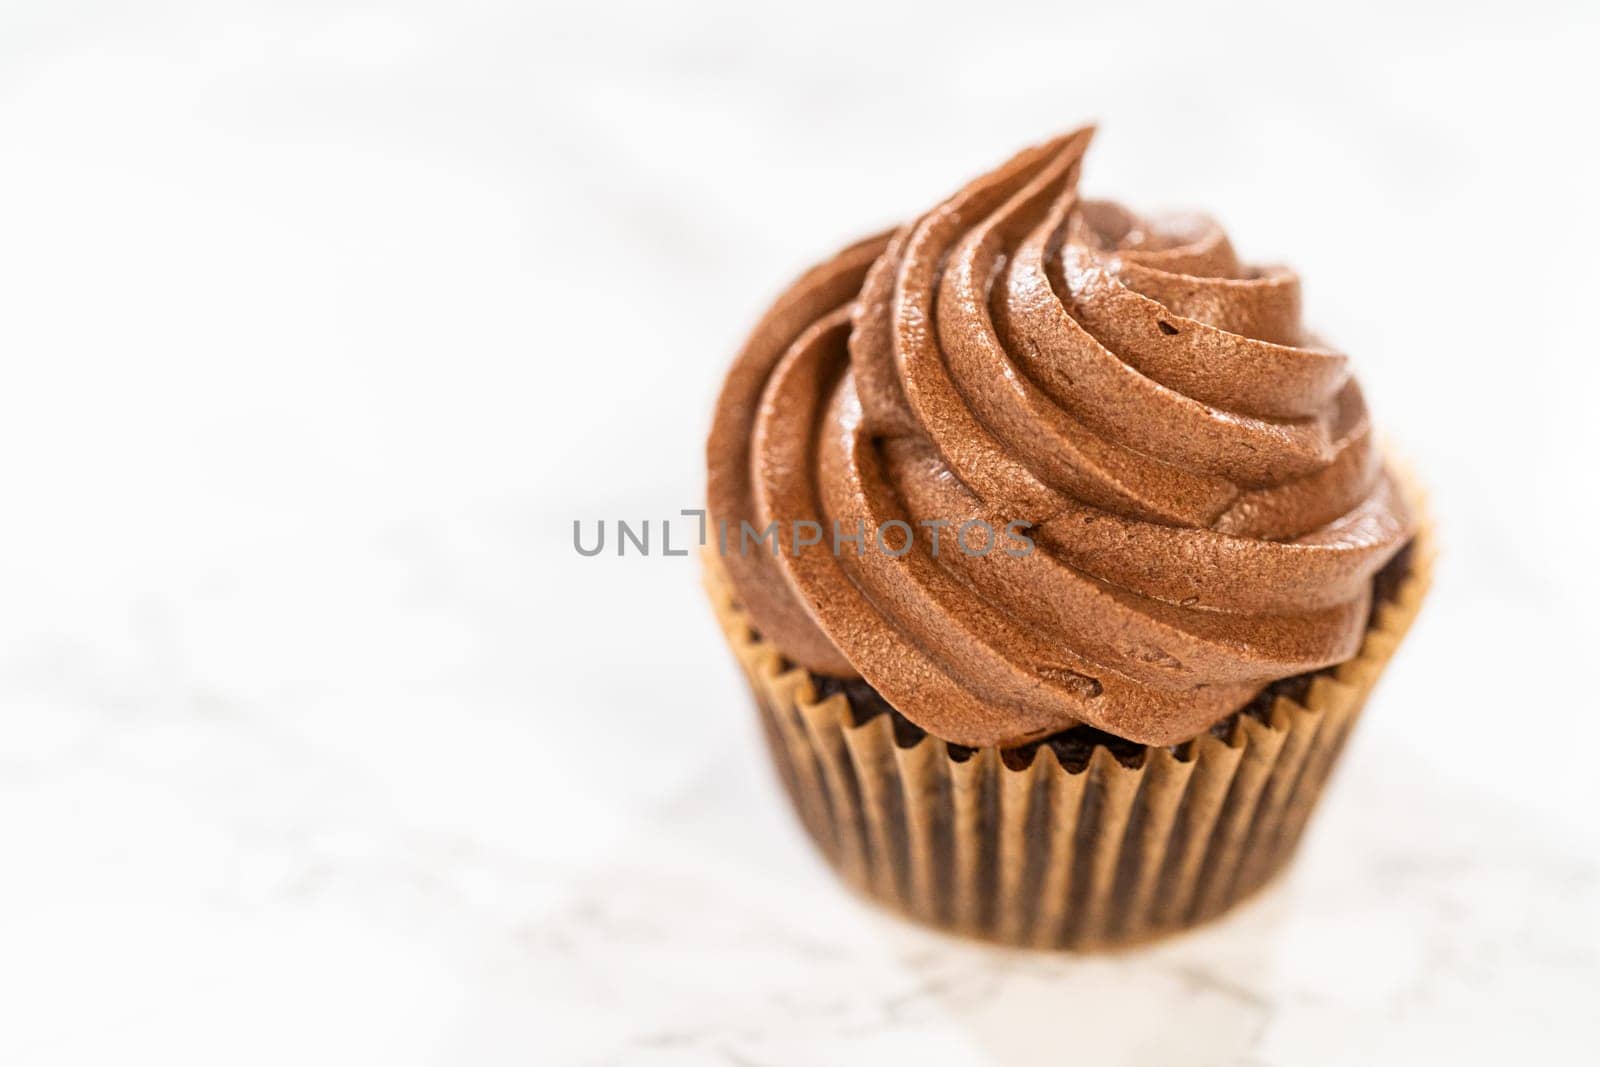 Baking Chocolate Cupcakes with Decadent Chocolate Frosting by arinahabich